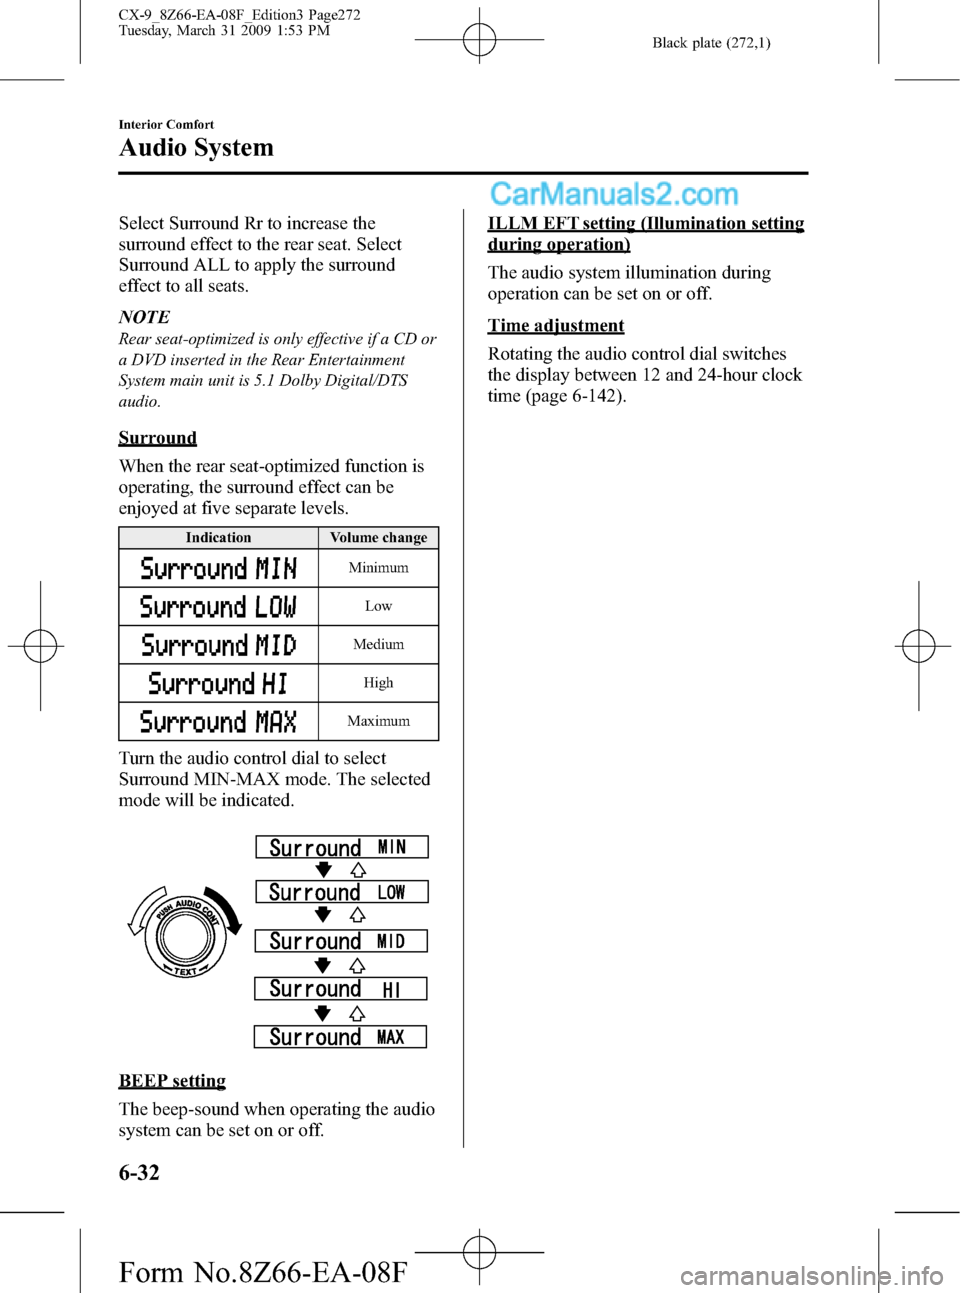 MAZDA MODEL CX-9 2009  Owners Manual (in English) Black plate (272,1)
Select Surround Rr to increase the
surround effect to the rear seat. Select
Surround ALL to apply the surround
effect to all seats.
NOTE
Rear seat-optimized is only effective if a 